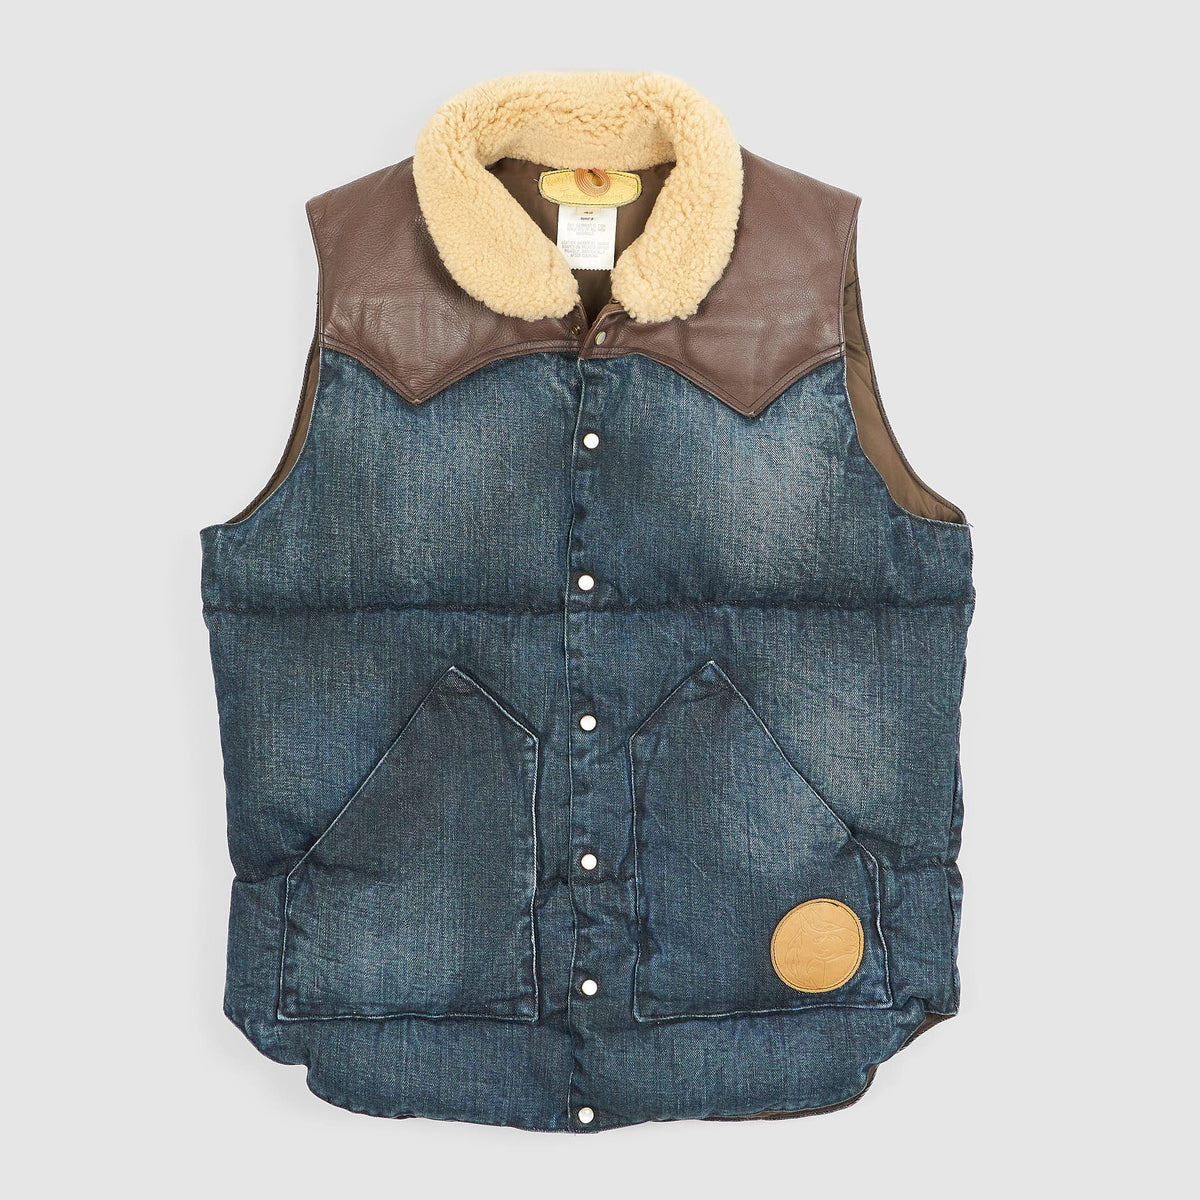 Rocky Mountain Featherbed Indigo Shearling Collar Down Vest with Leather Yokes